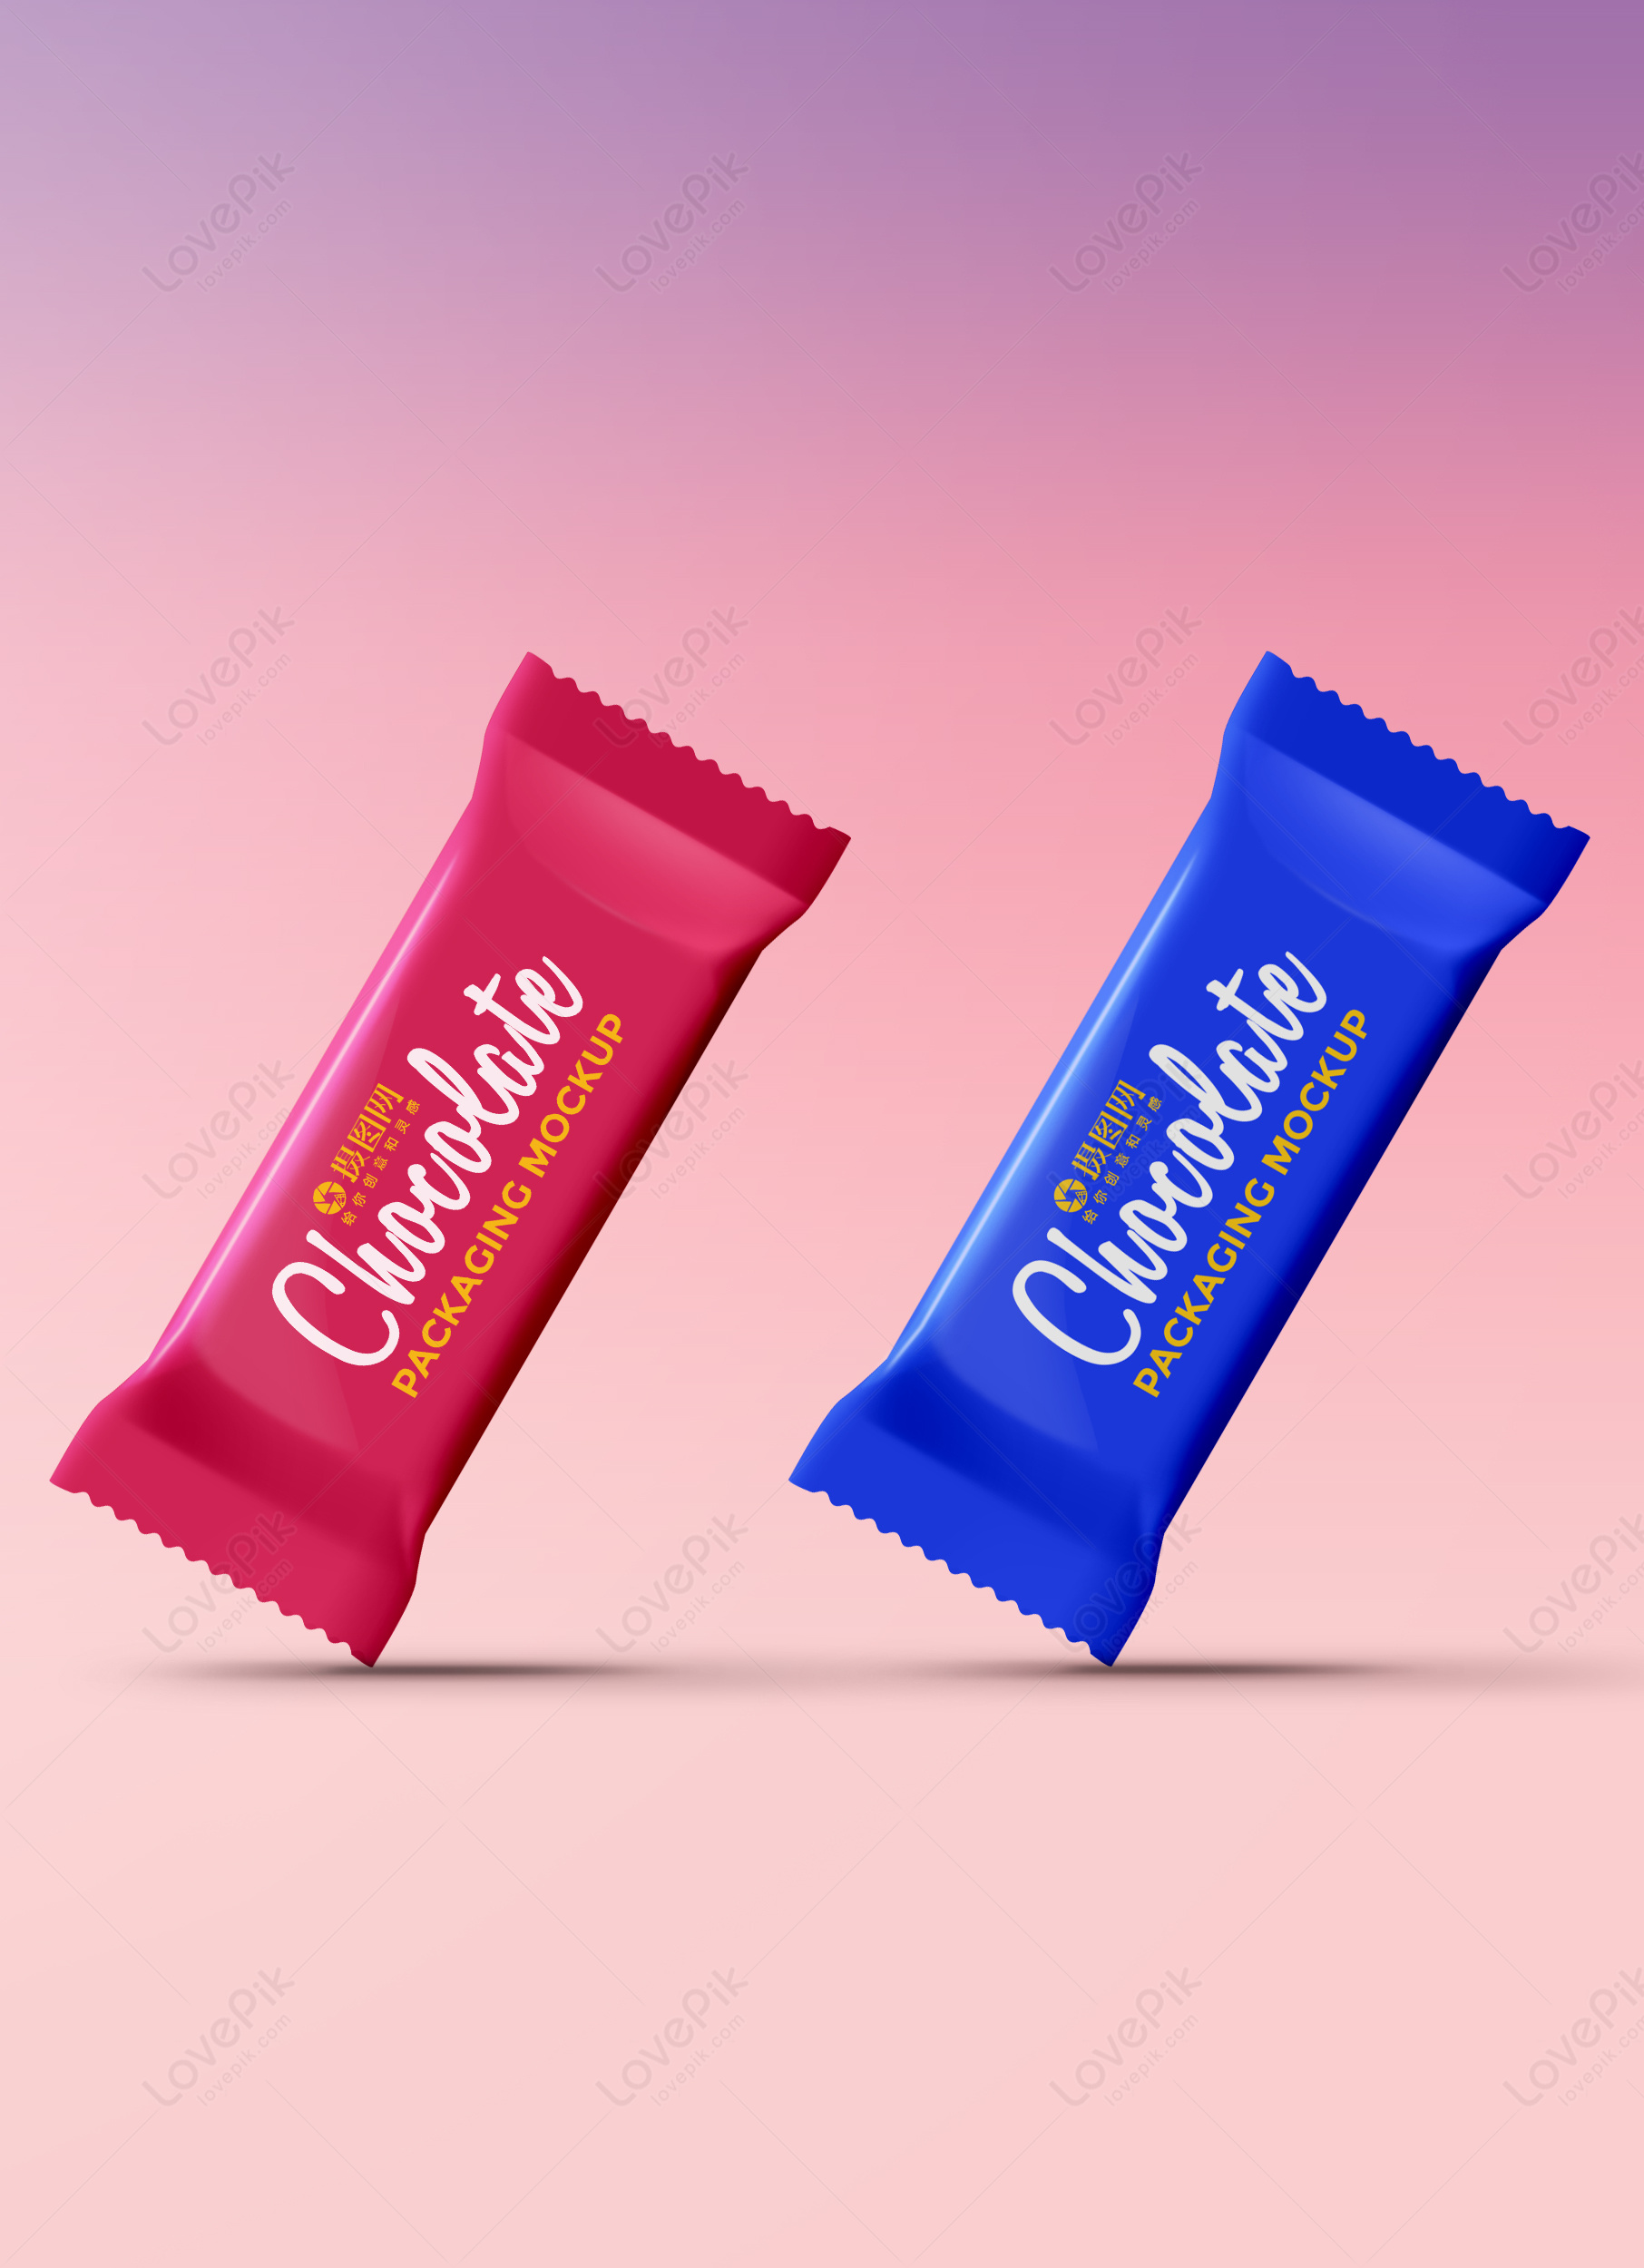 Download Chocolate Candy Packaging Mockup Template Image Picture Free Download 400832499 Lovepik Com